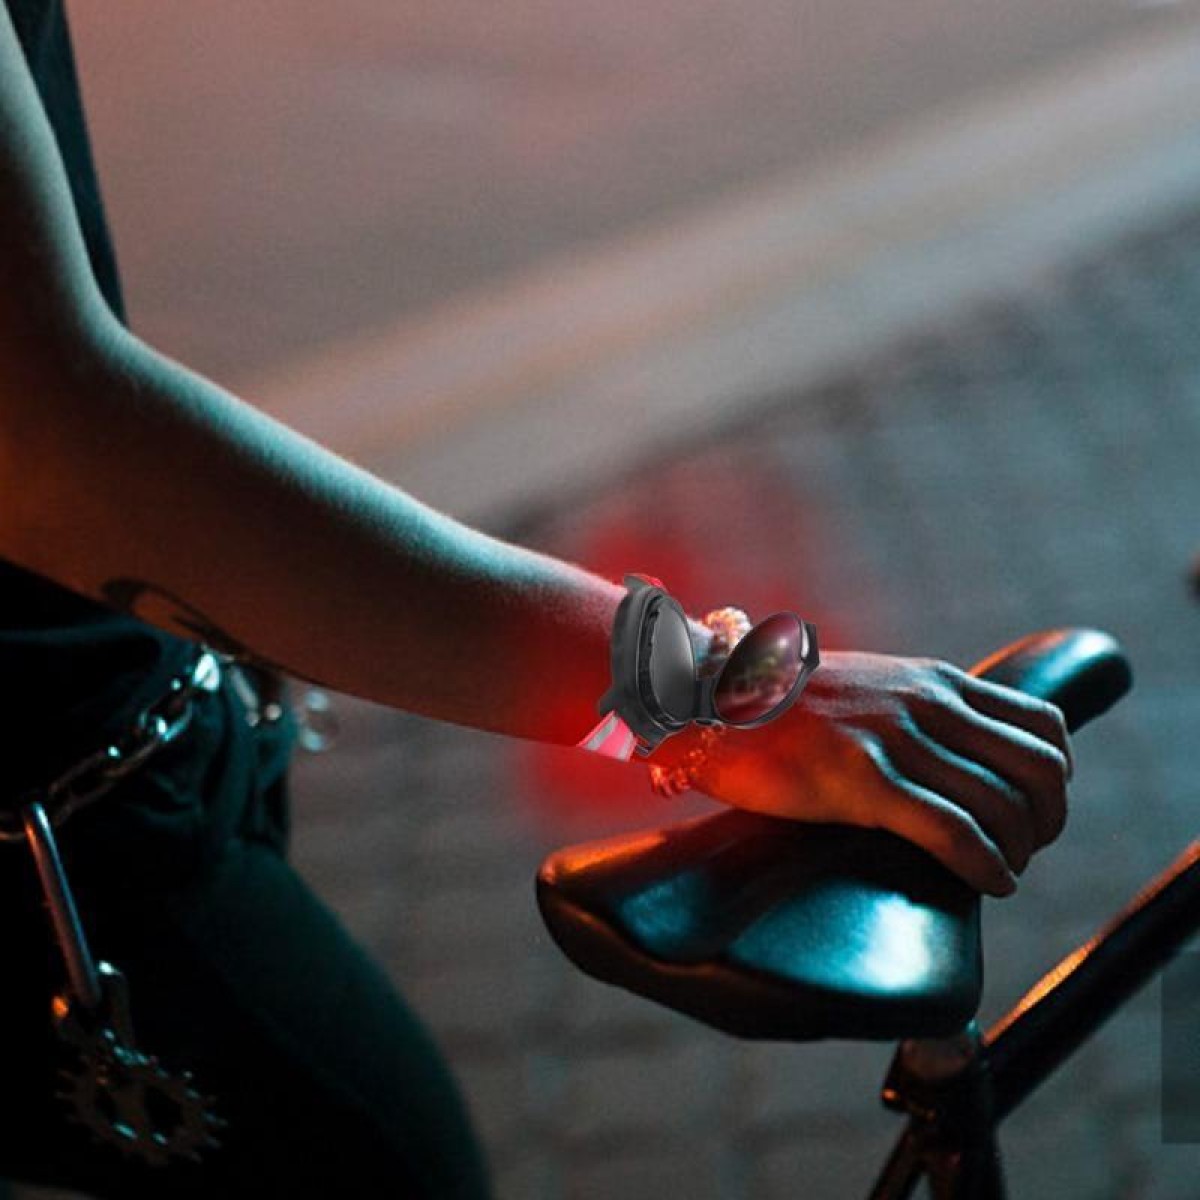 Bicycle 360-degree Rotating Rearview Mirror With Wrist Light